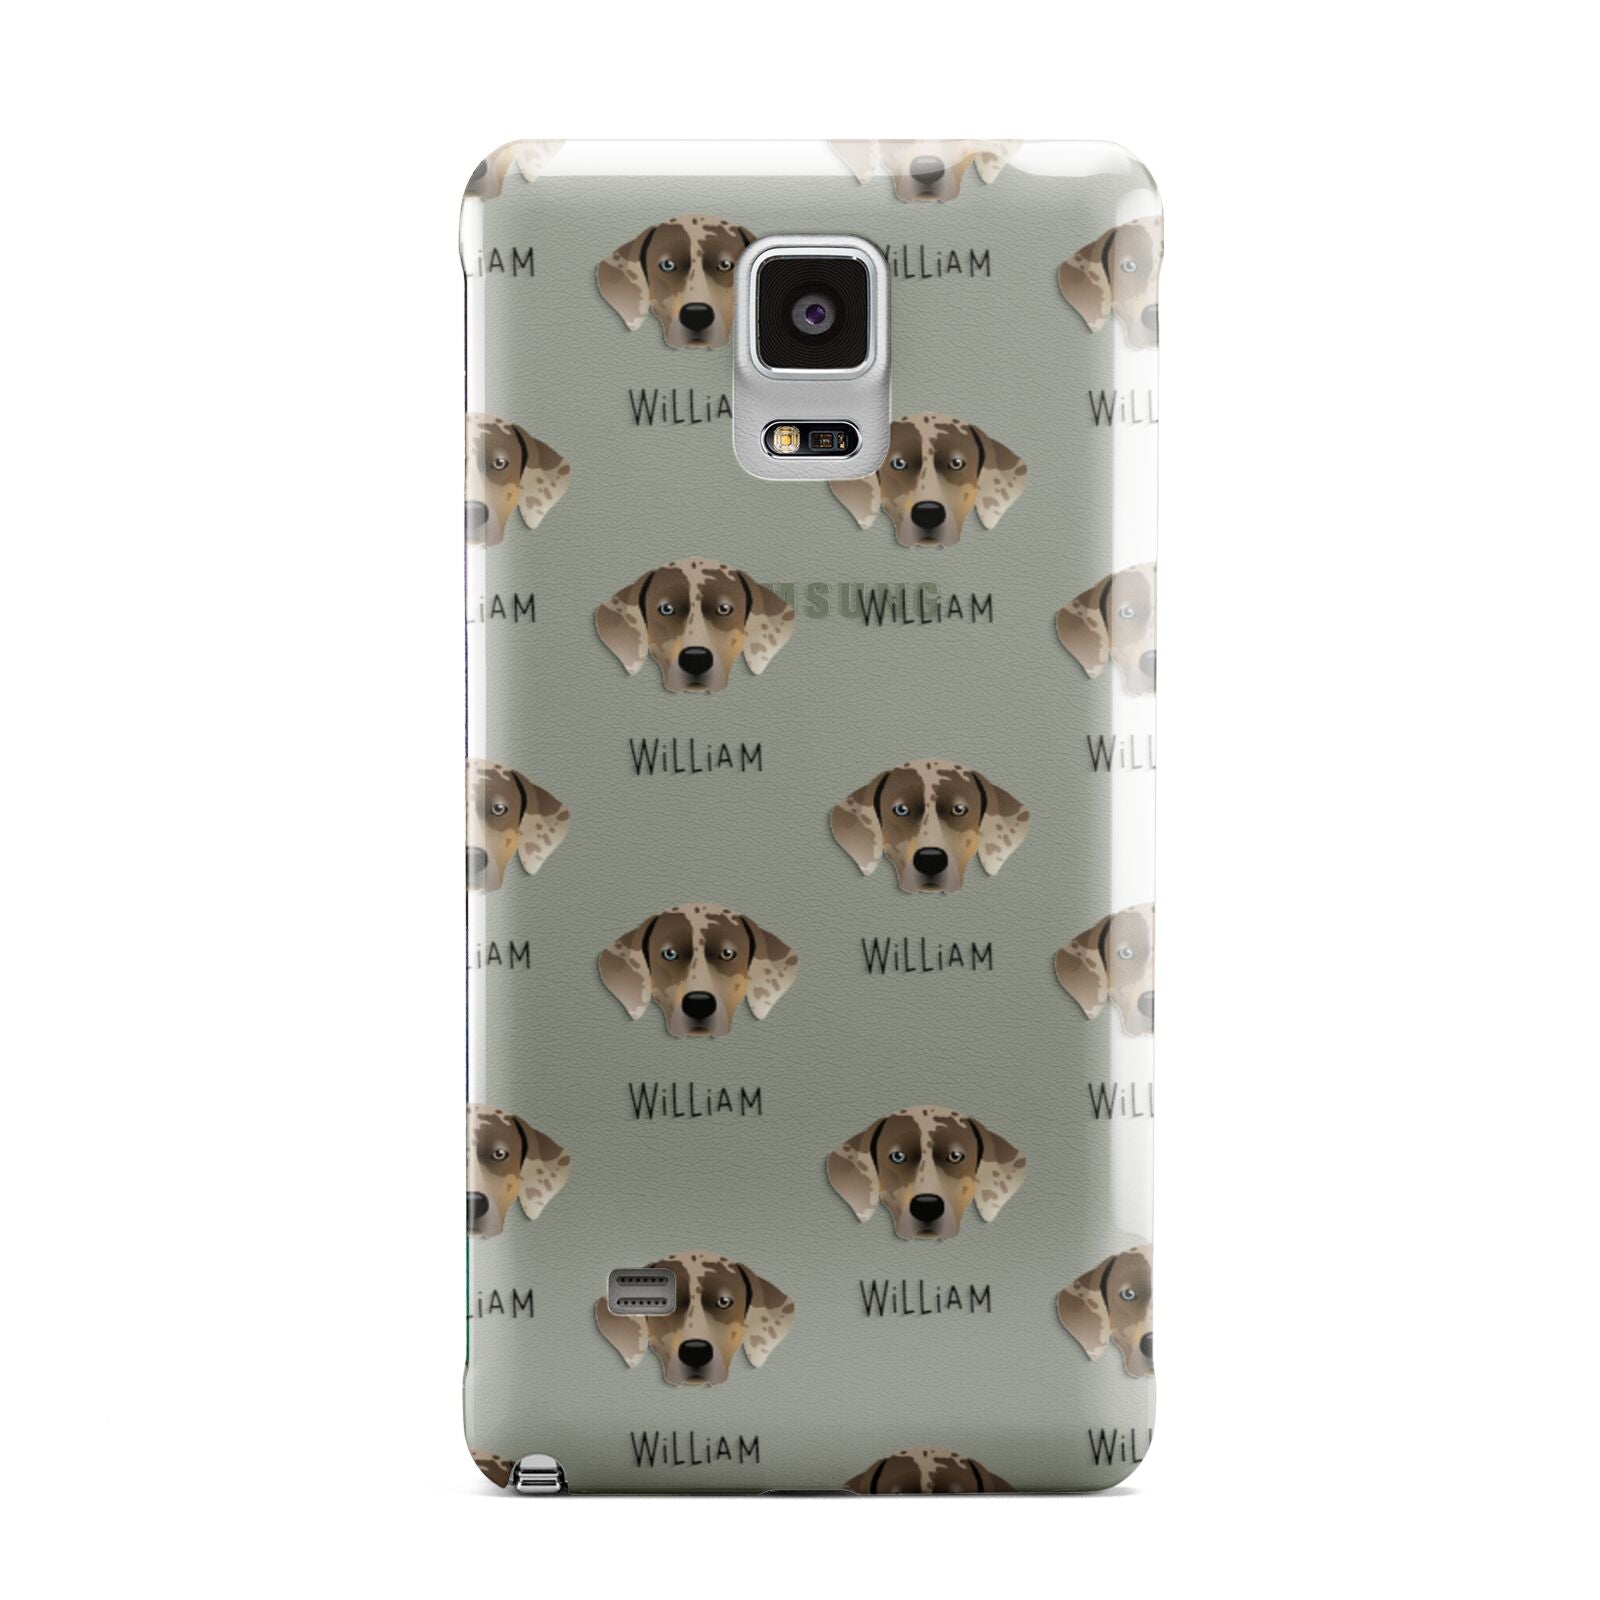 Catahoula Leopard Dog Icon with Name Samsung Galaxy Note 4 Case